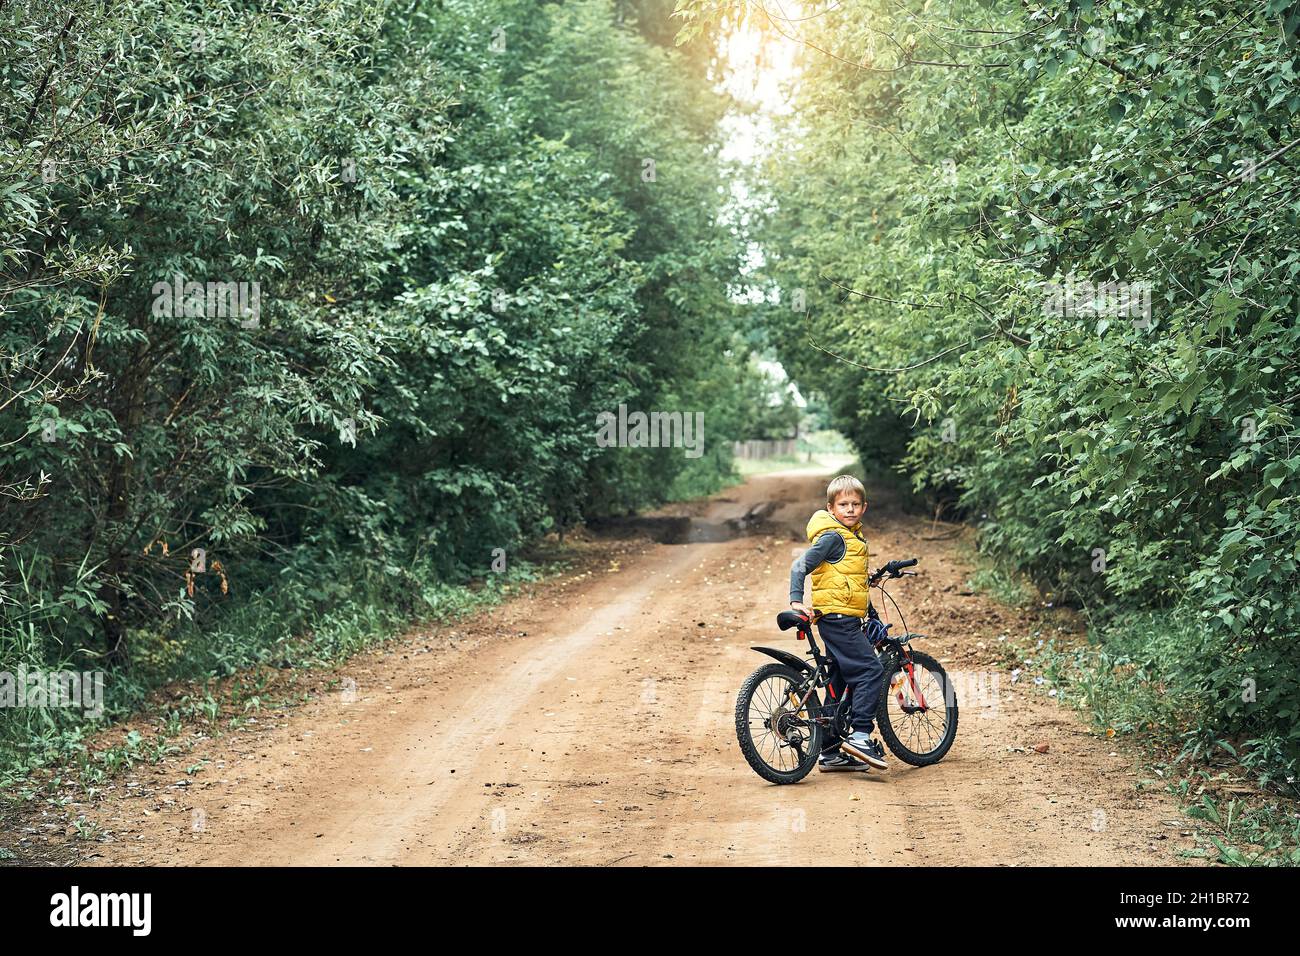 Adorable little boy in yellow vest with modern bicycle looks at camera on rural ground road with green trees on sides in summer Stock Photo